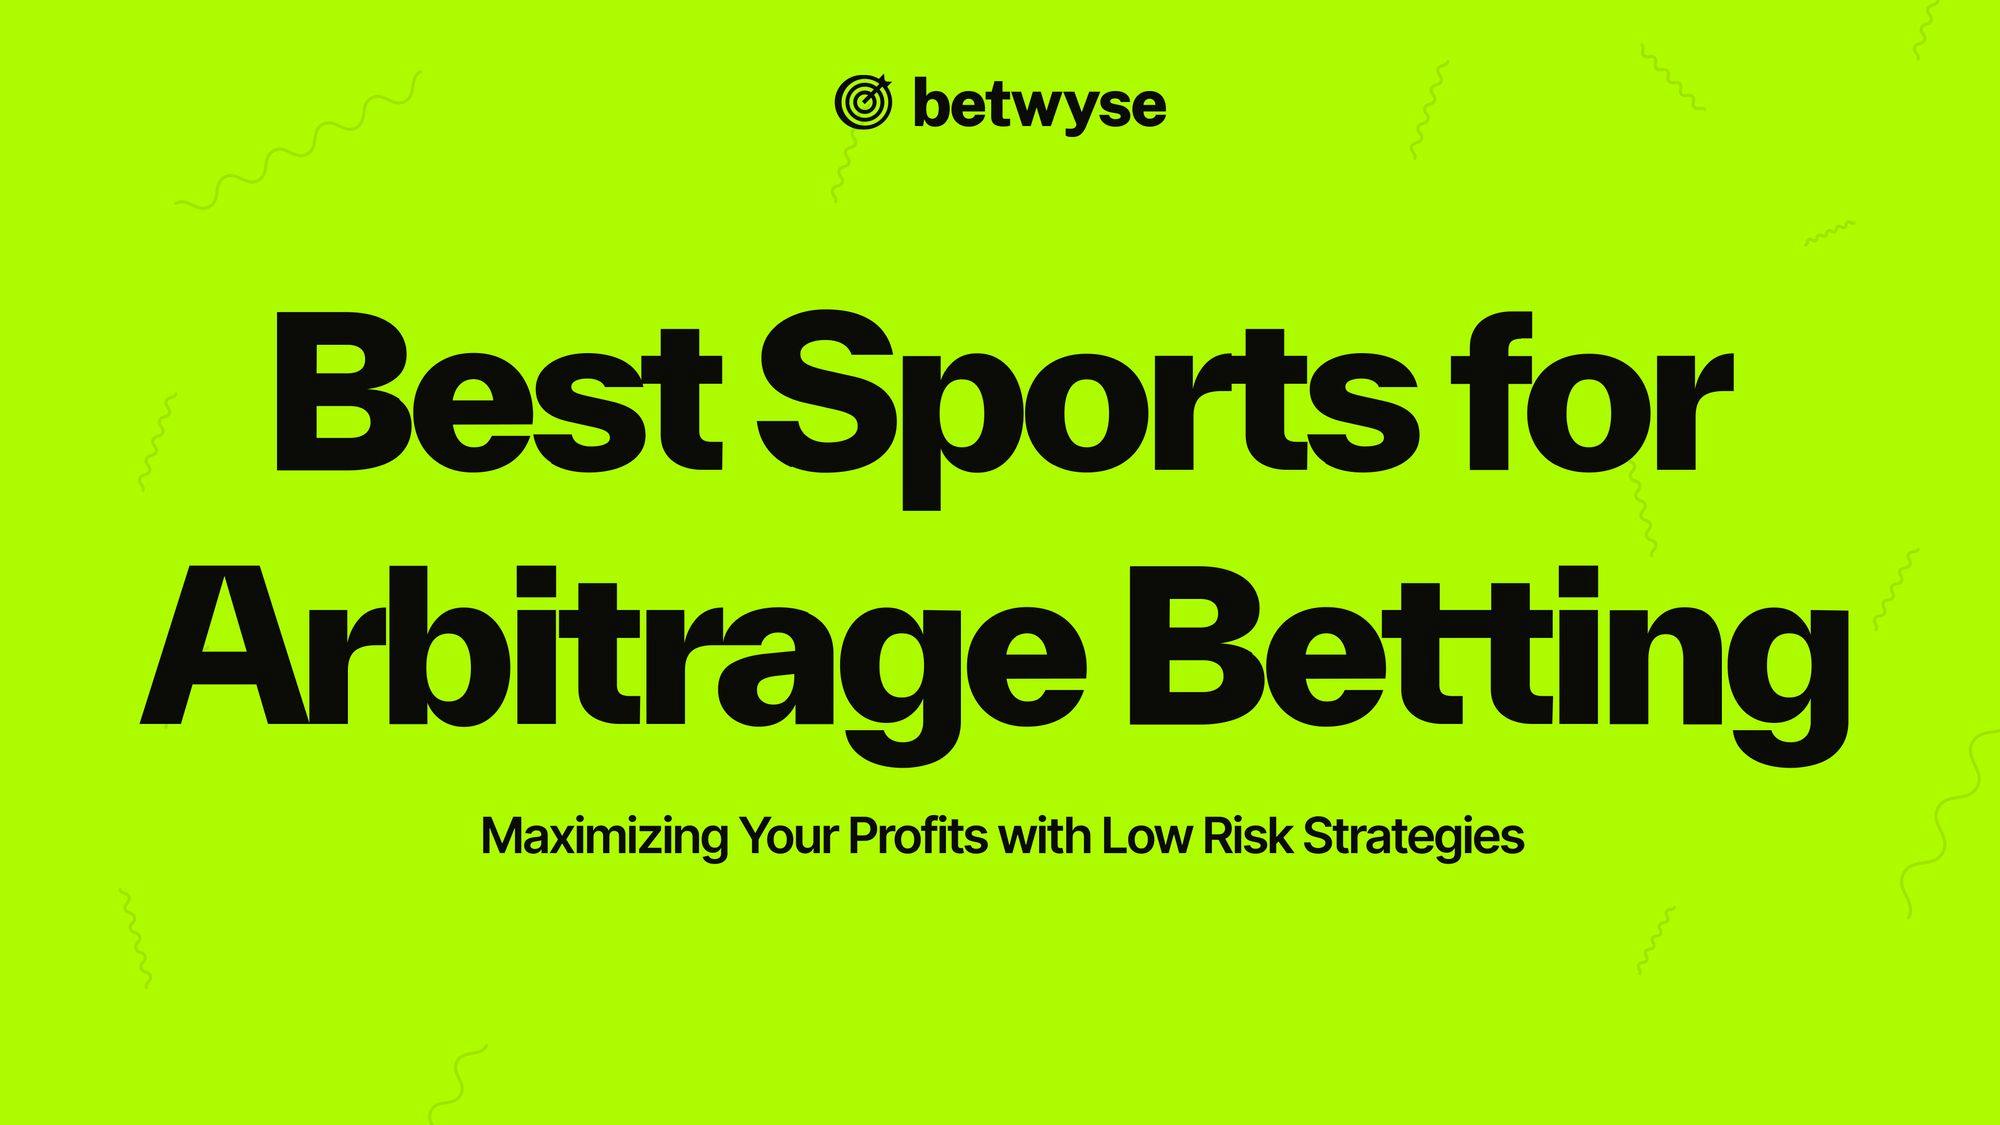 best sports for arbitrage betting image